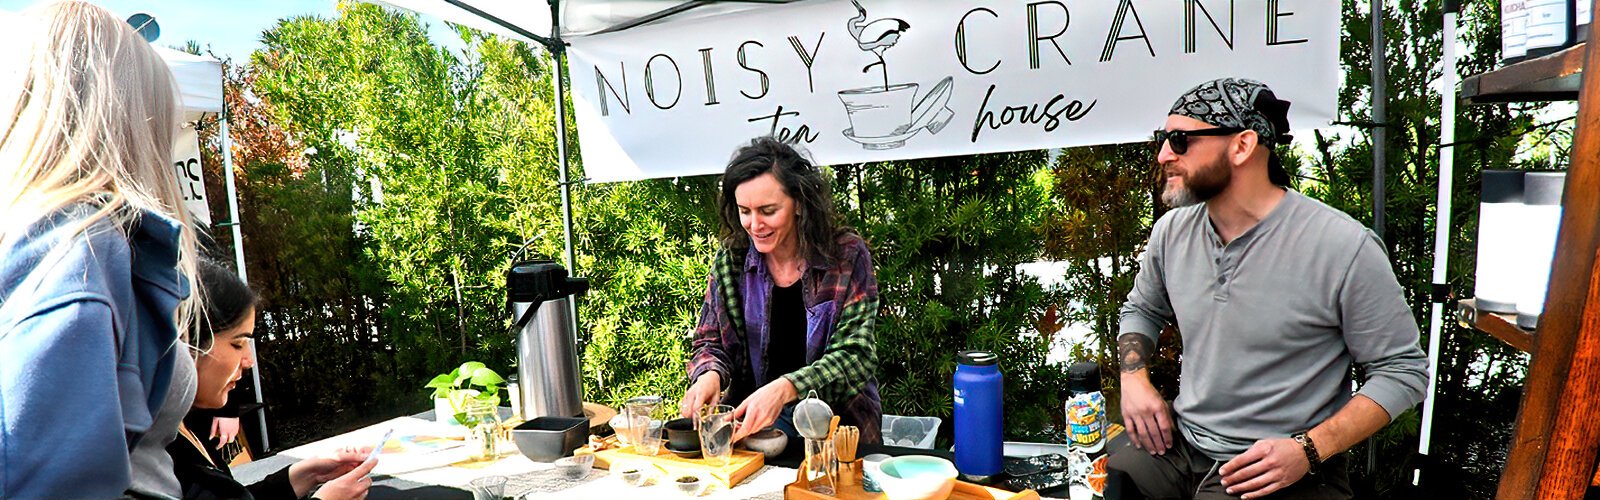 At the Noisy Crane Tea House Asian-style booth, certified-in-tea-ceremony-practice KC Cavanaugh offers patrons a gong fu cha (Chinese tea tasting) experience while sampling teas.